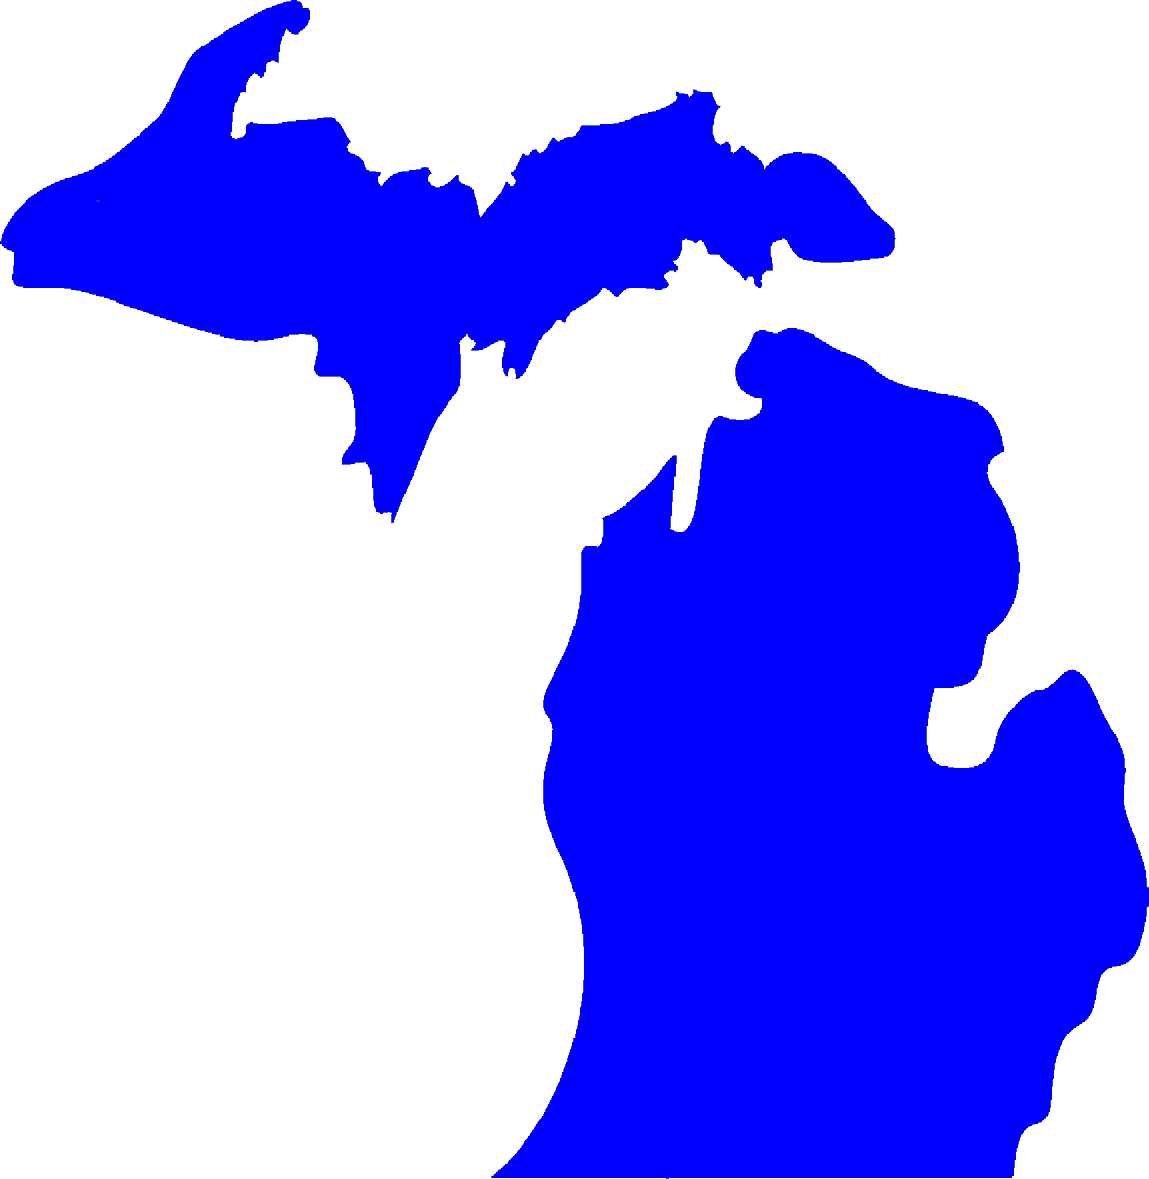 38 state of michigan logo. - Free Clipart Images